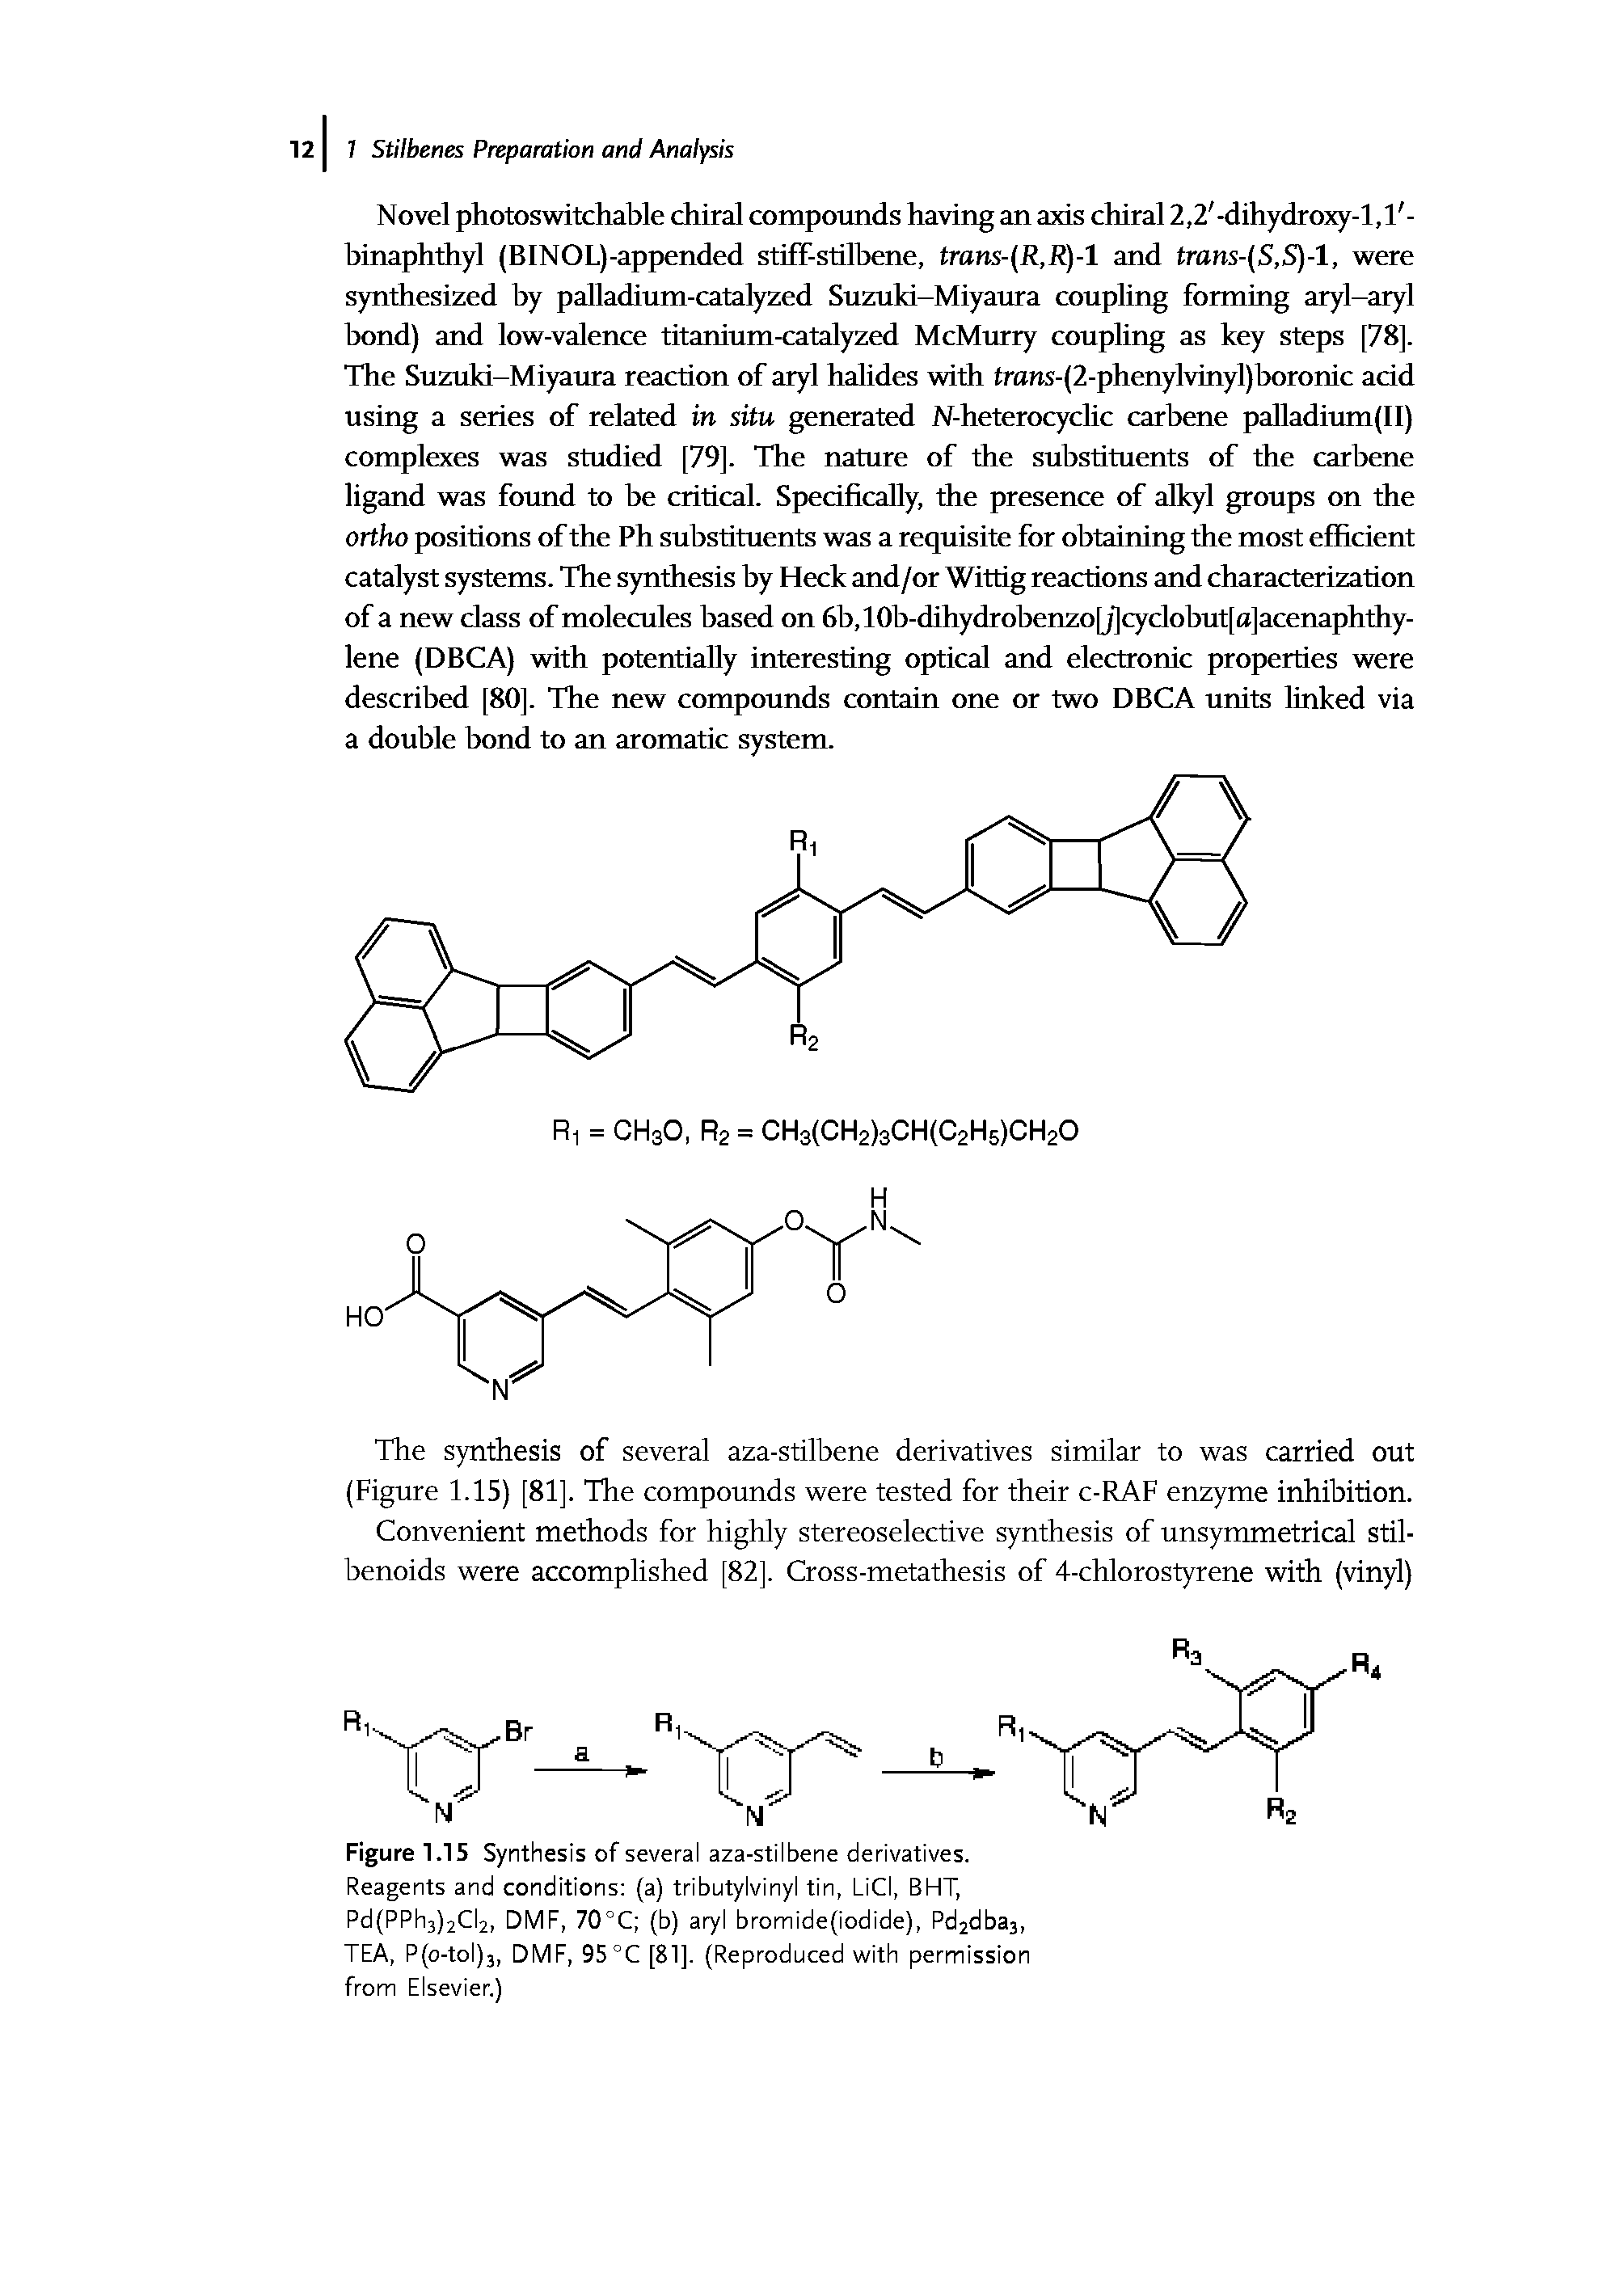 Figure 1.15 Synthesis of several aza-stilbene derivatives. Reagents and conditions (a) tributylvinyl tin, LiCI, BHT, Pd(PPh3)2Cl2, DMF, 70°C (b) aryl bromide(iodide), Pd2dba3, TEA, P(o-tol)3, DMF, 95°C [81]. (Reproduced with permission from Elsevier.)...